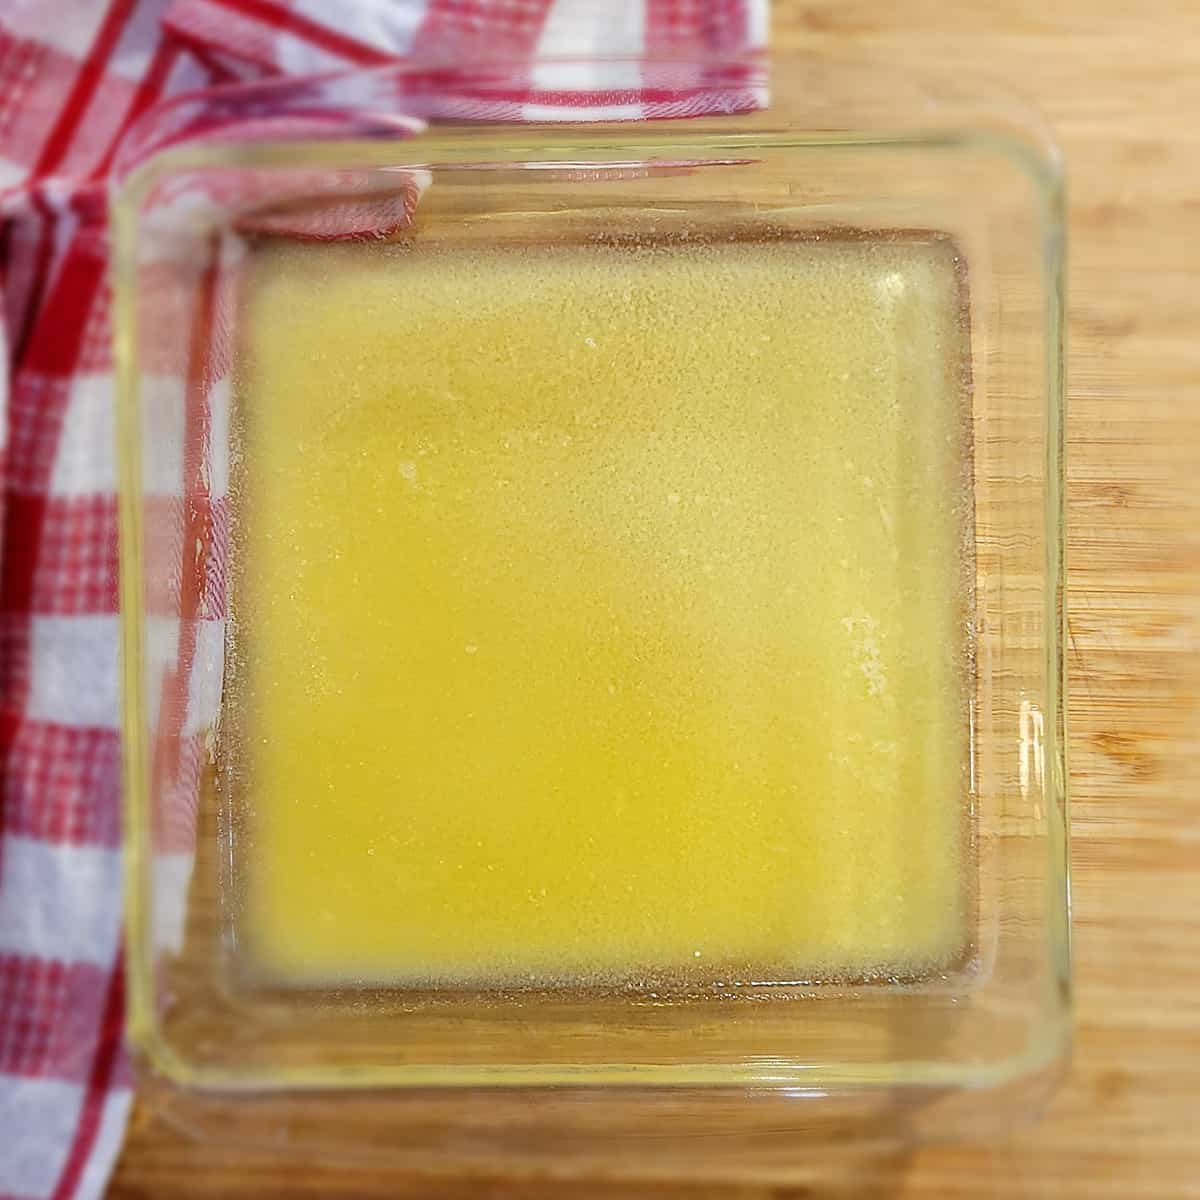 Melted butter poured into a square baking dish.